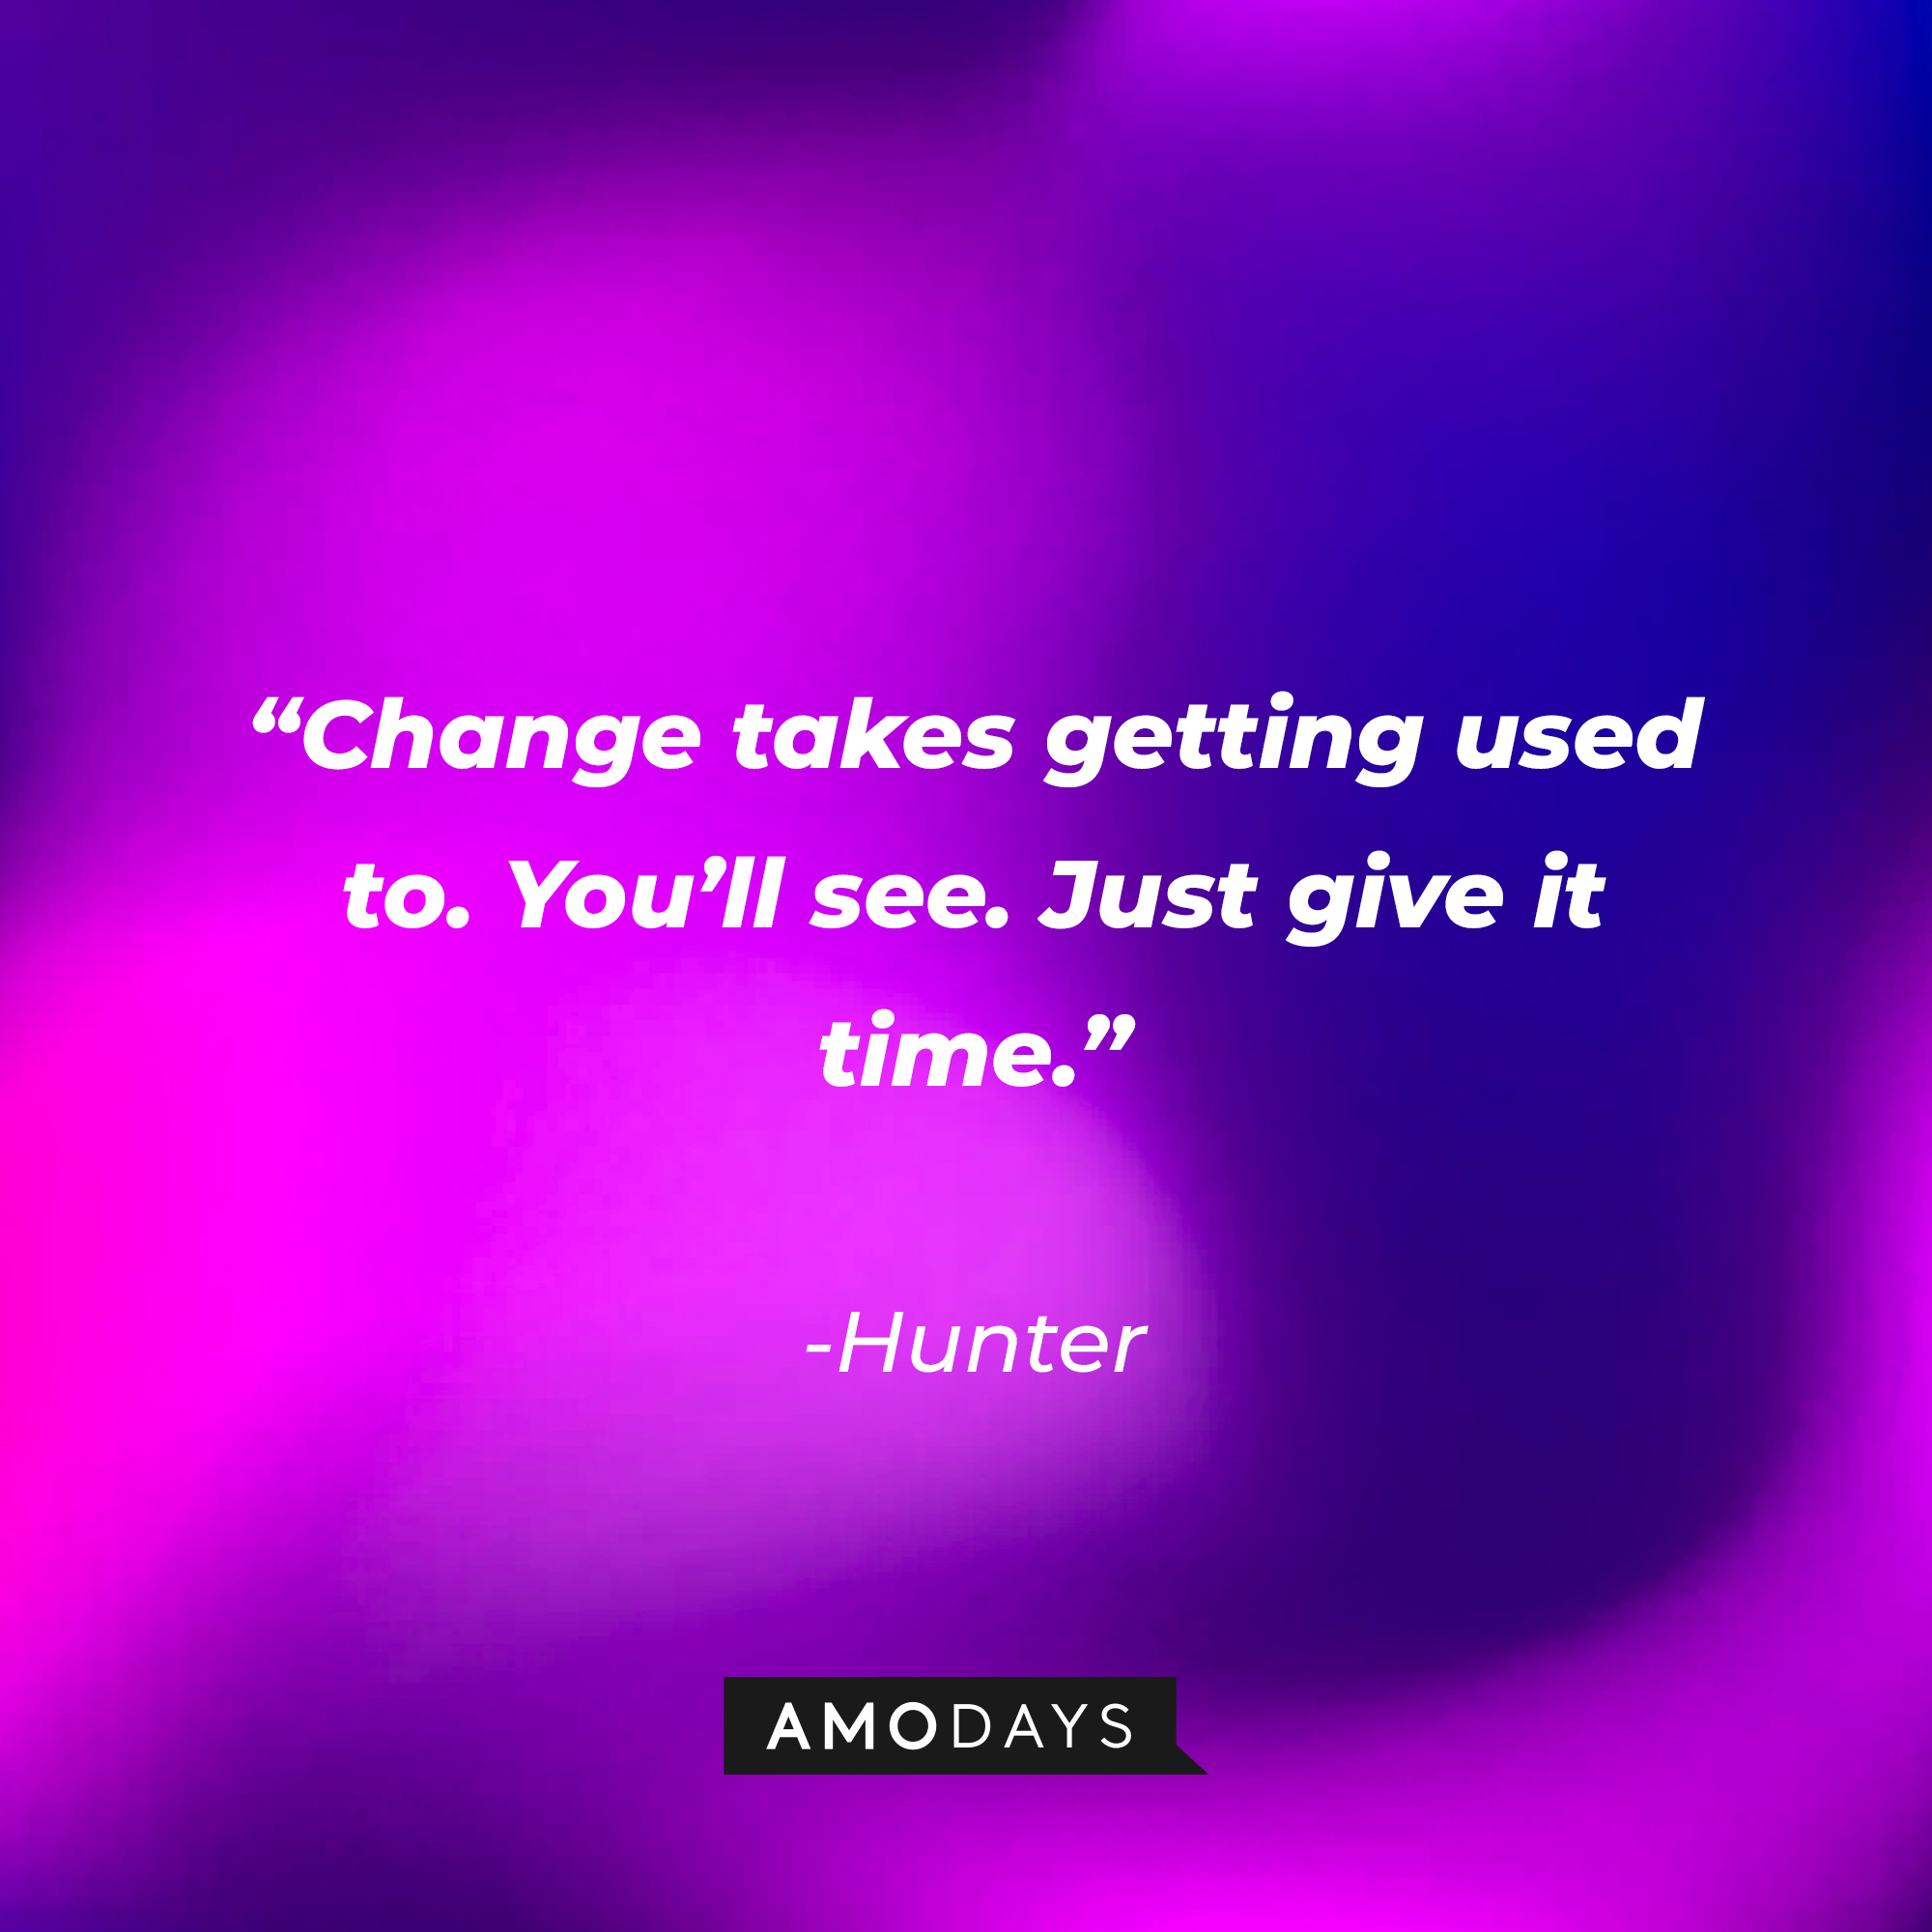 Hunter’s quote: “Change takes getting used to. You’ll see. Just give it time.” | Source: AmoDays